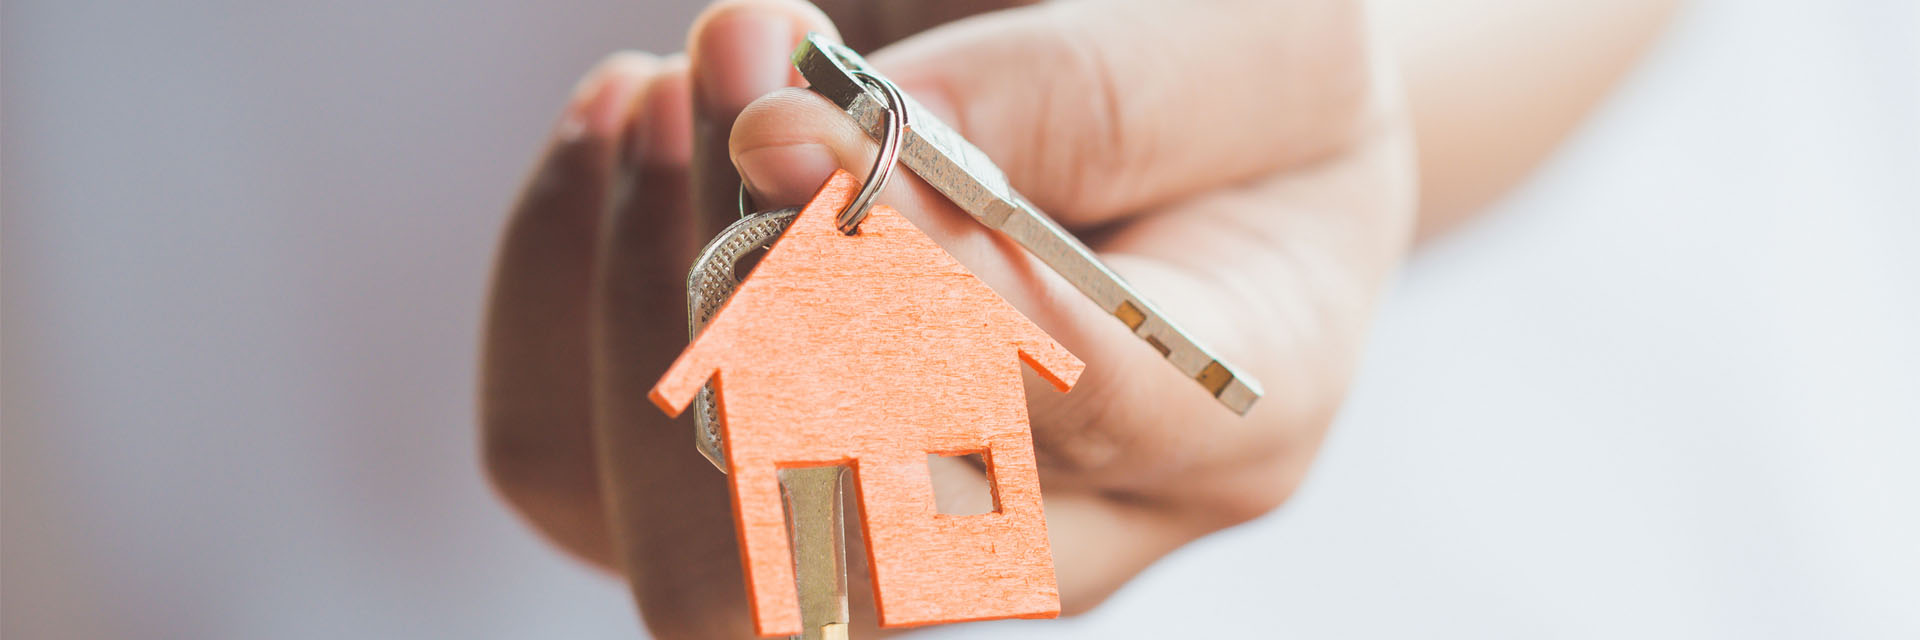 Image showing a close up of a hand holding a set of keys with a house keyring